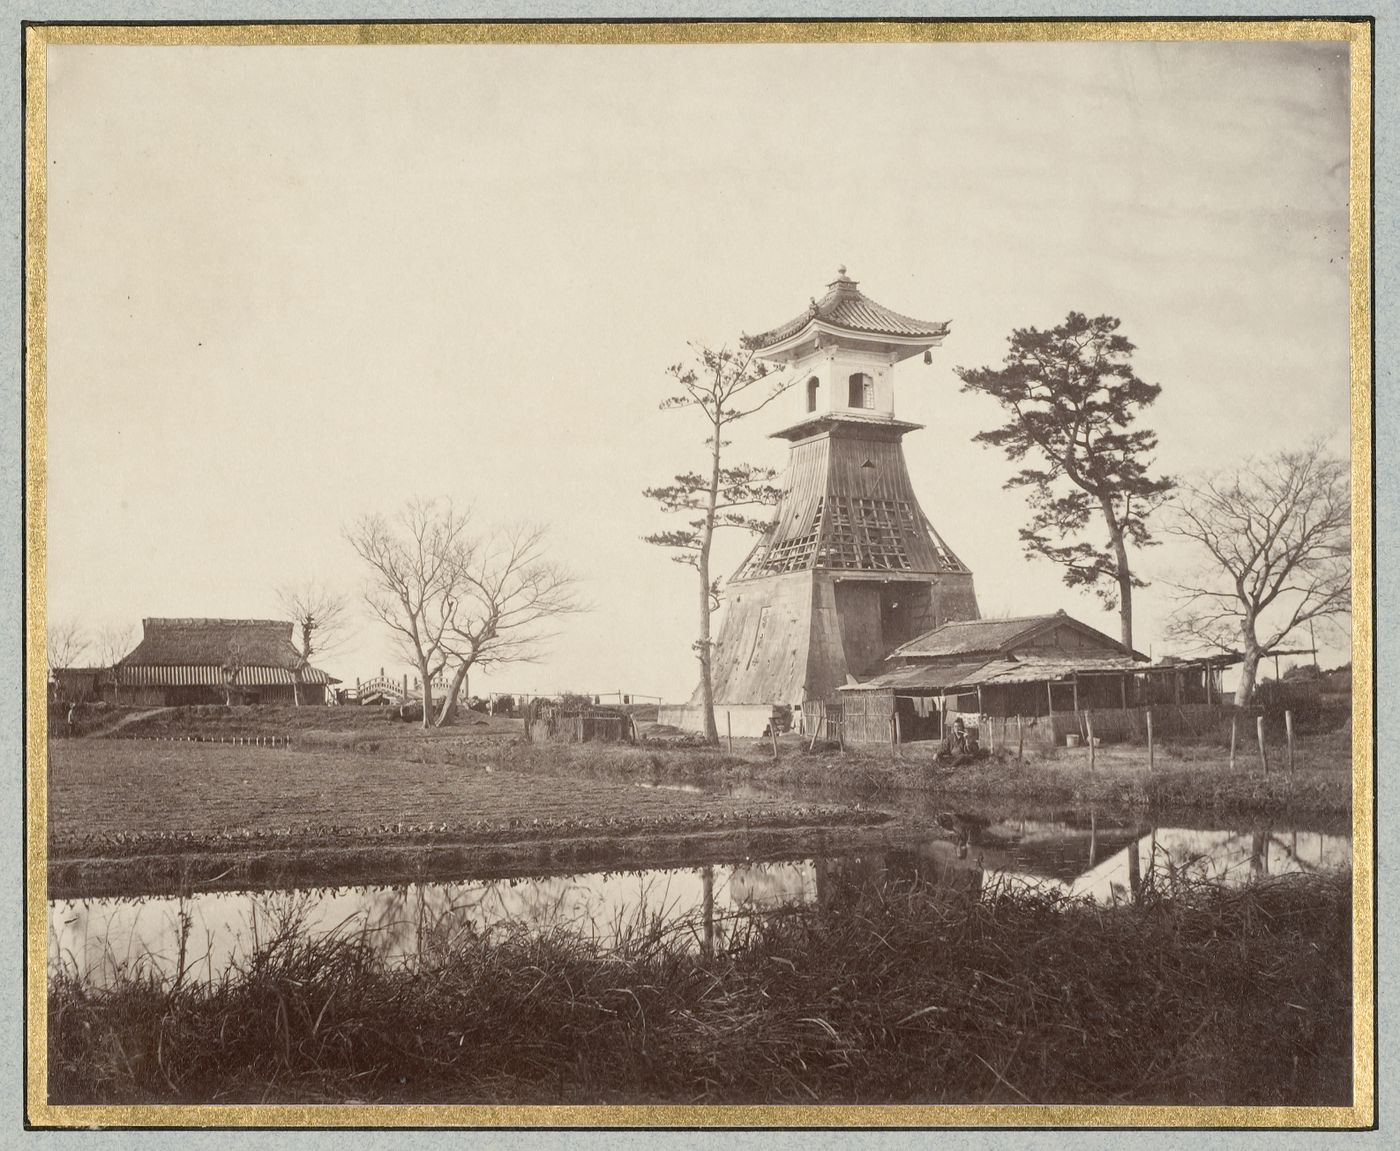 View of a wooden tower and buildings showing a moat and a bridge, near Kobe [?], Japan